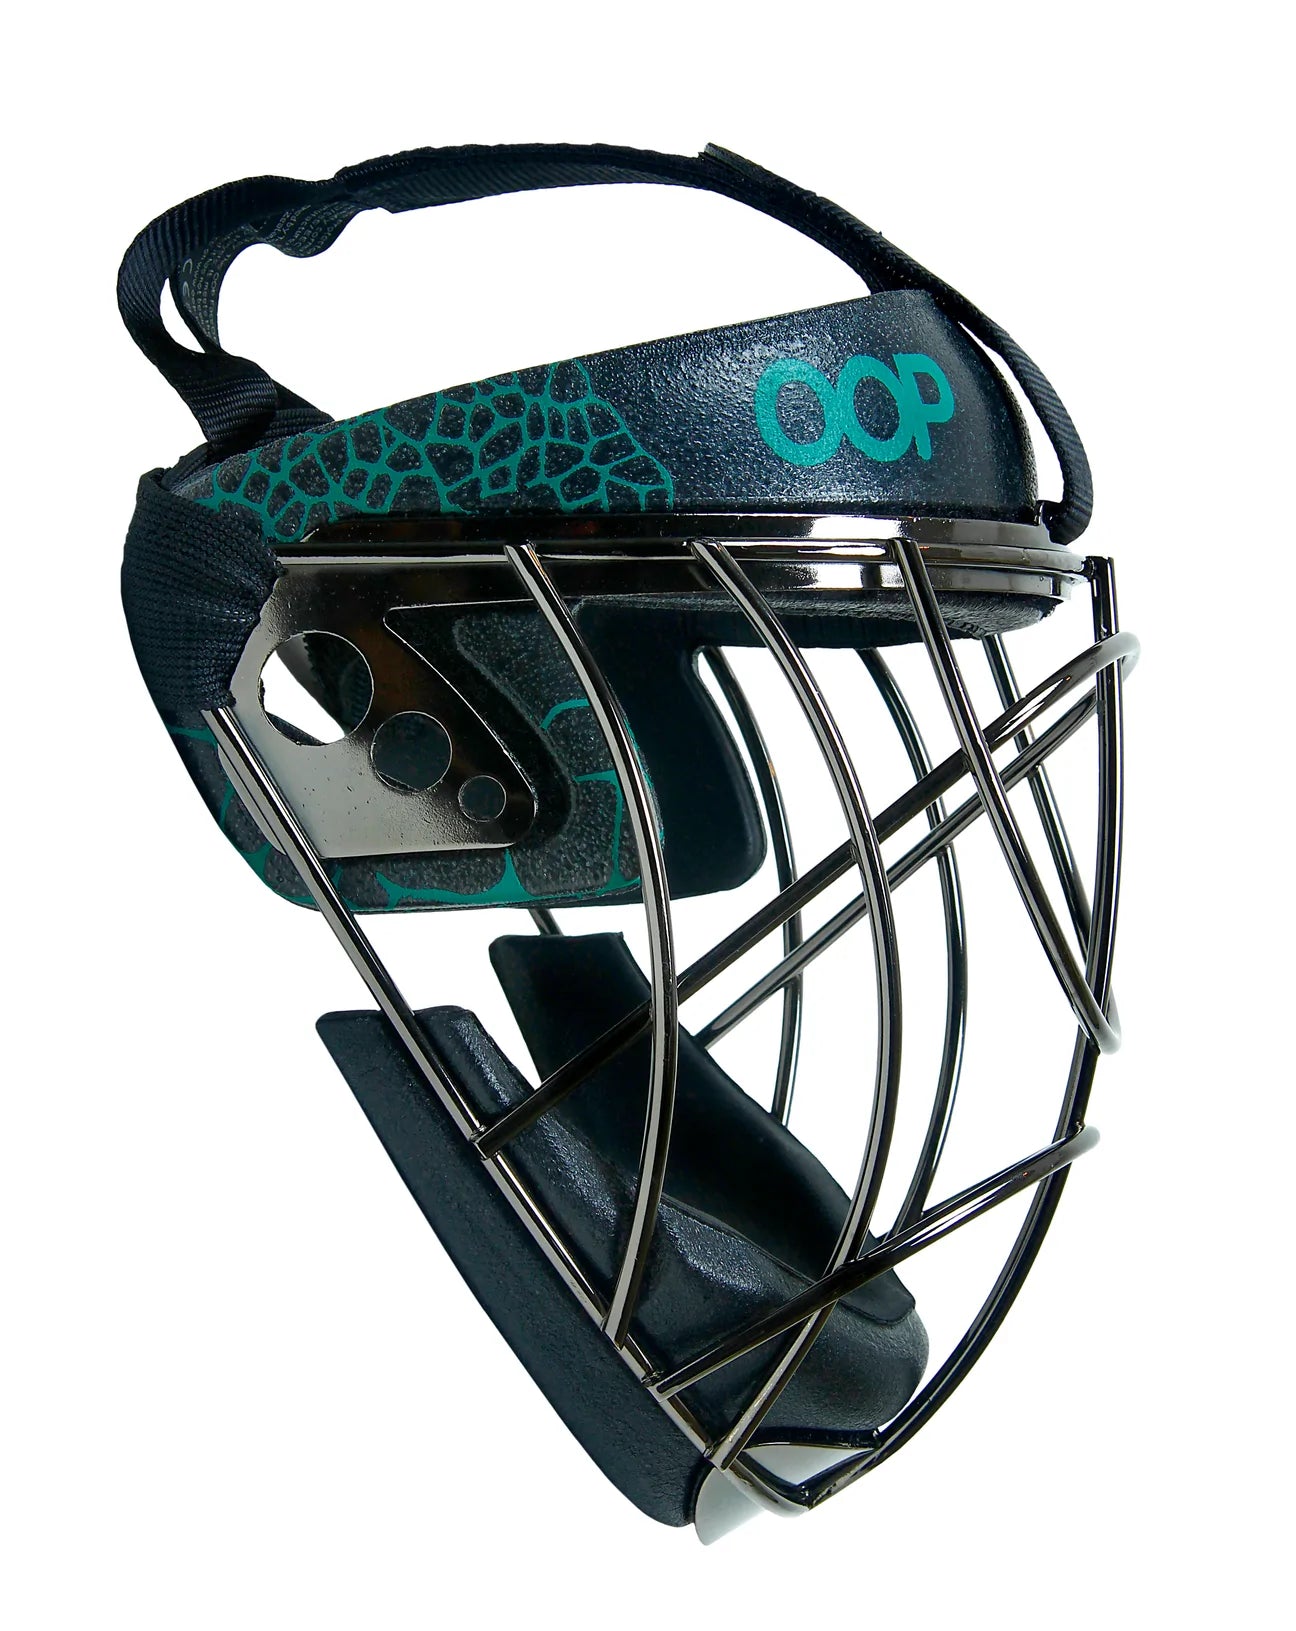 OOP Youth Face Off Steel PC Face Mask